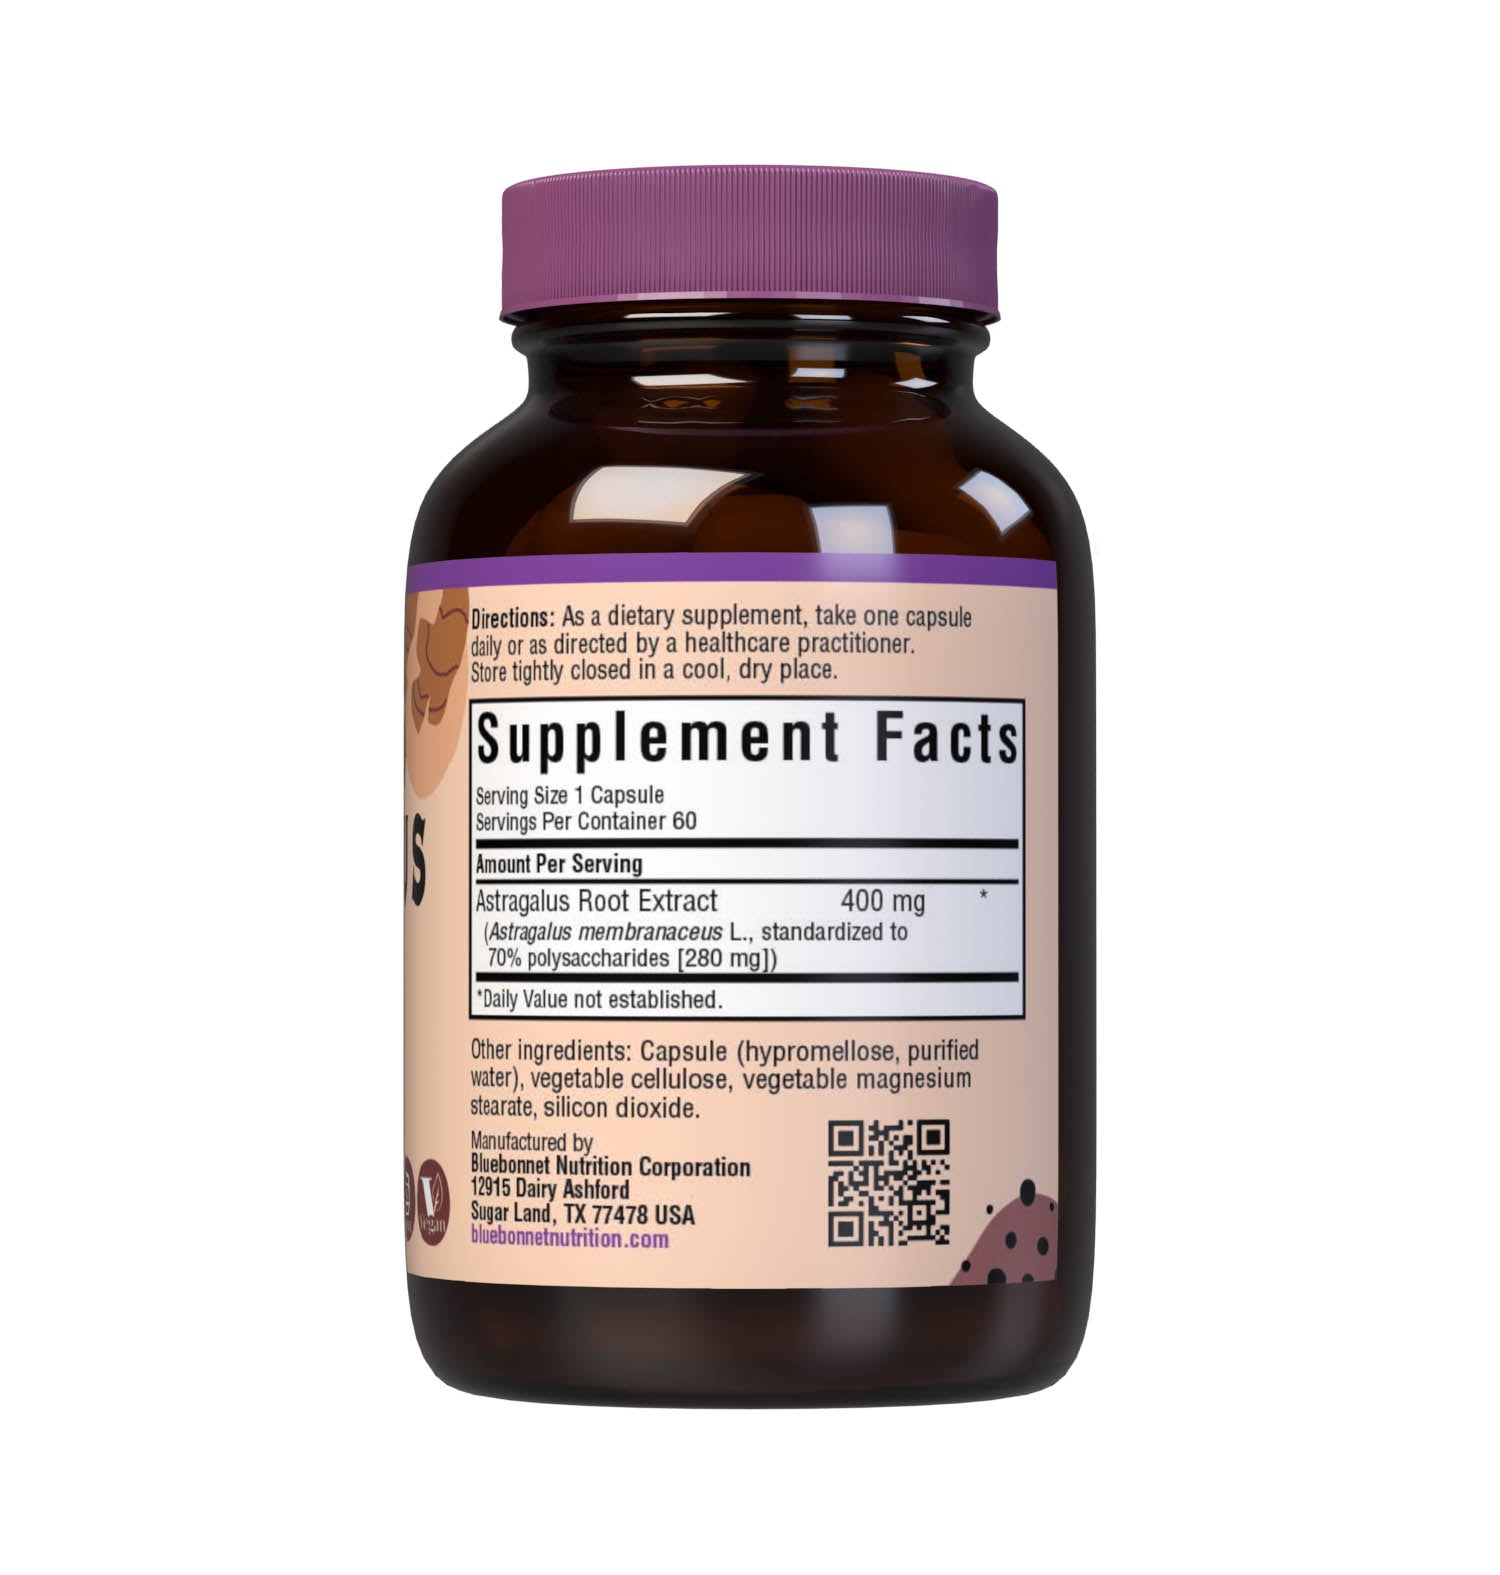 Bluebonnet’s Astragalus Root Extract 60 Vegetable Capsules provide a standardized extract of polysaccharides, the most researched active constituents found in astragalus root to support immune health. A clean and gentle water-based extraction method is employed to capture and preserve astragalus’ most valuable components. Supplement facts panel. #size_60 count